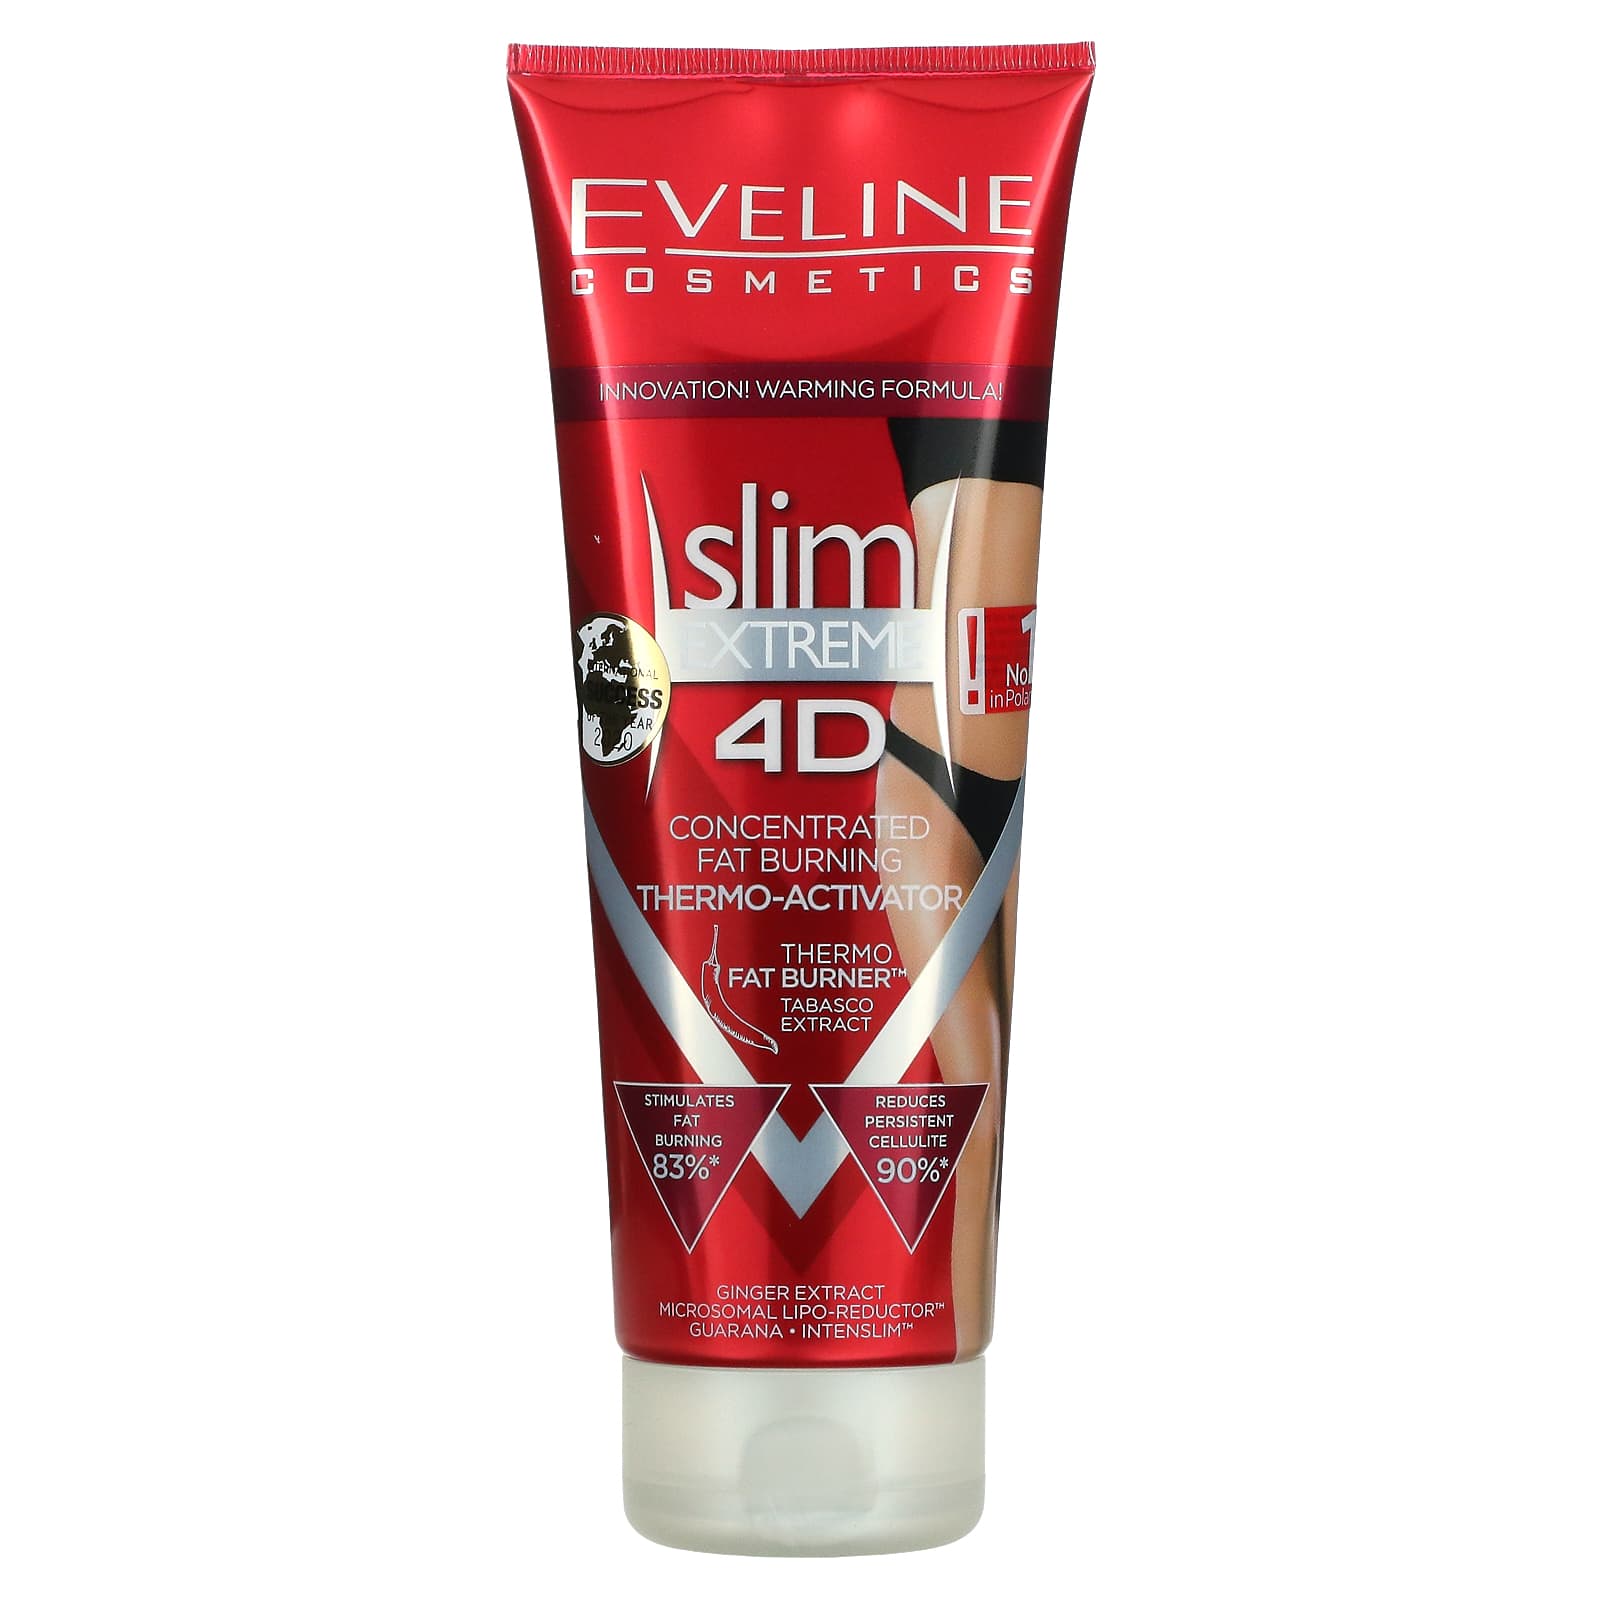 Eveline Cosmetics Slim Extreme 4d Concentrated Fat Burning Thermo Activator 8 8 Fl Oz 250 Ml